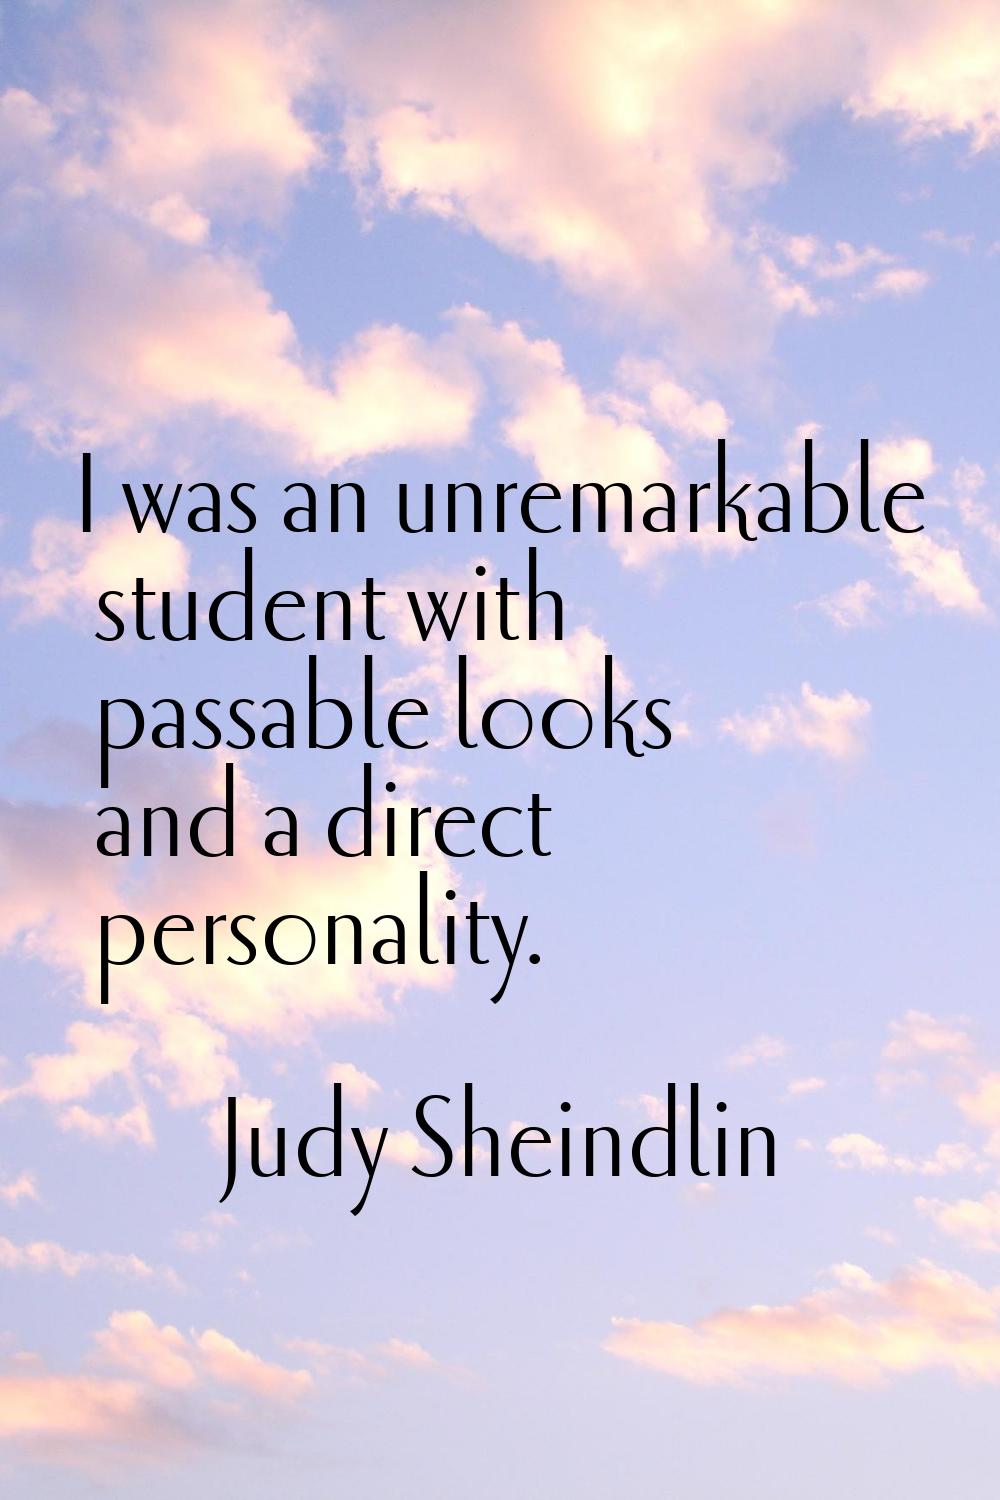 I was an unremarkable student with passable looks and a direct personality.